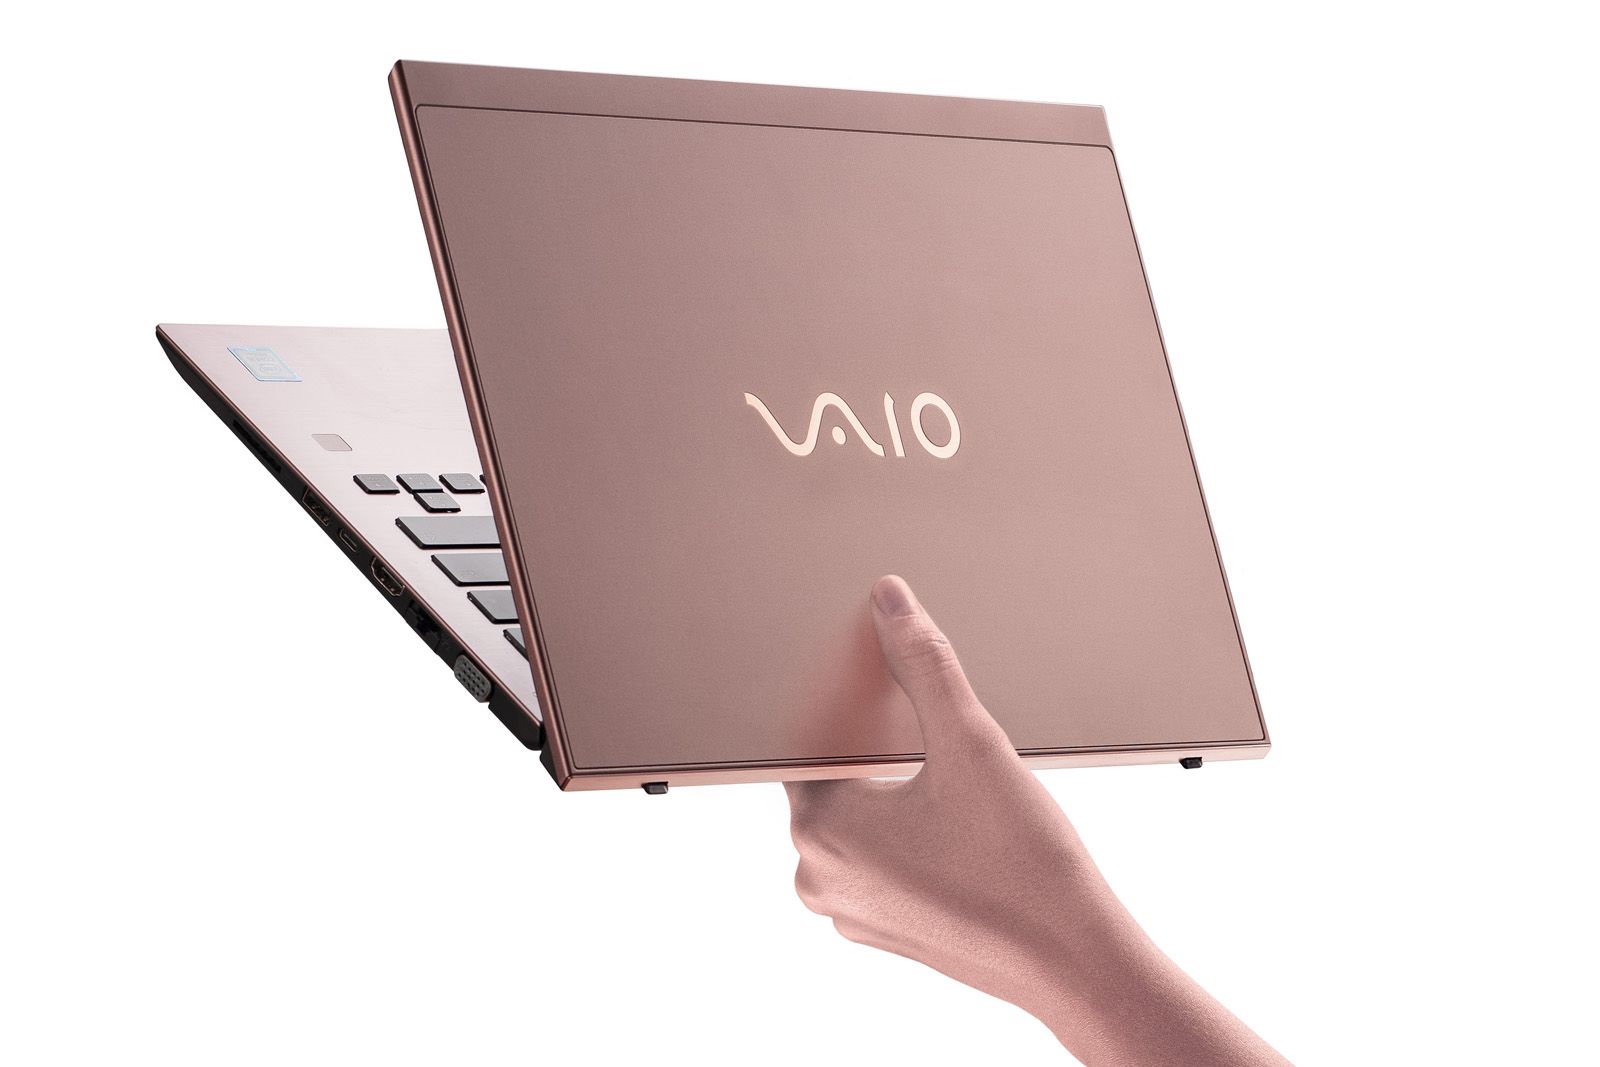 Theres a new Vaio laptop and a 2-in-1 too image 1